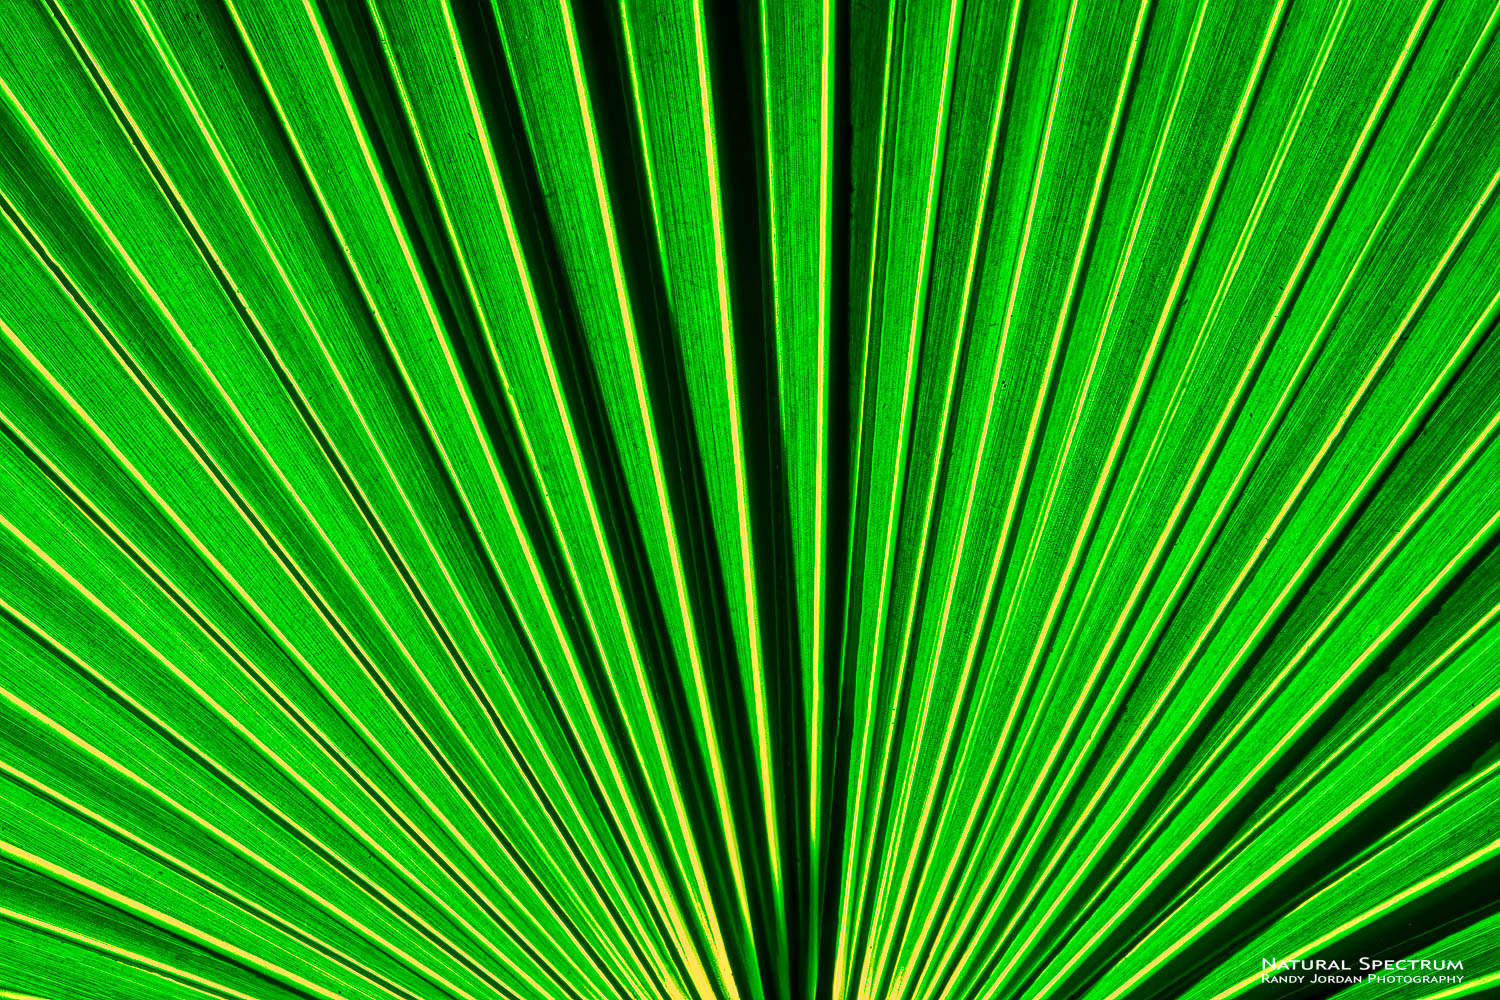 Abstraction of sunlight backlighting a Palmetto palm.